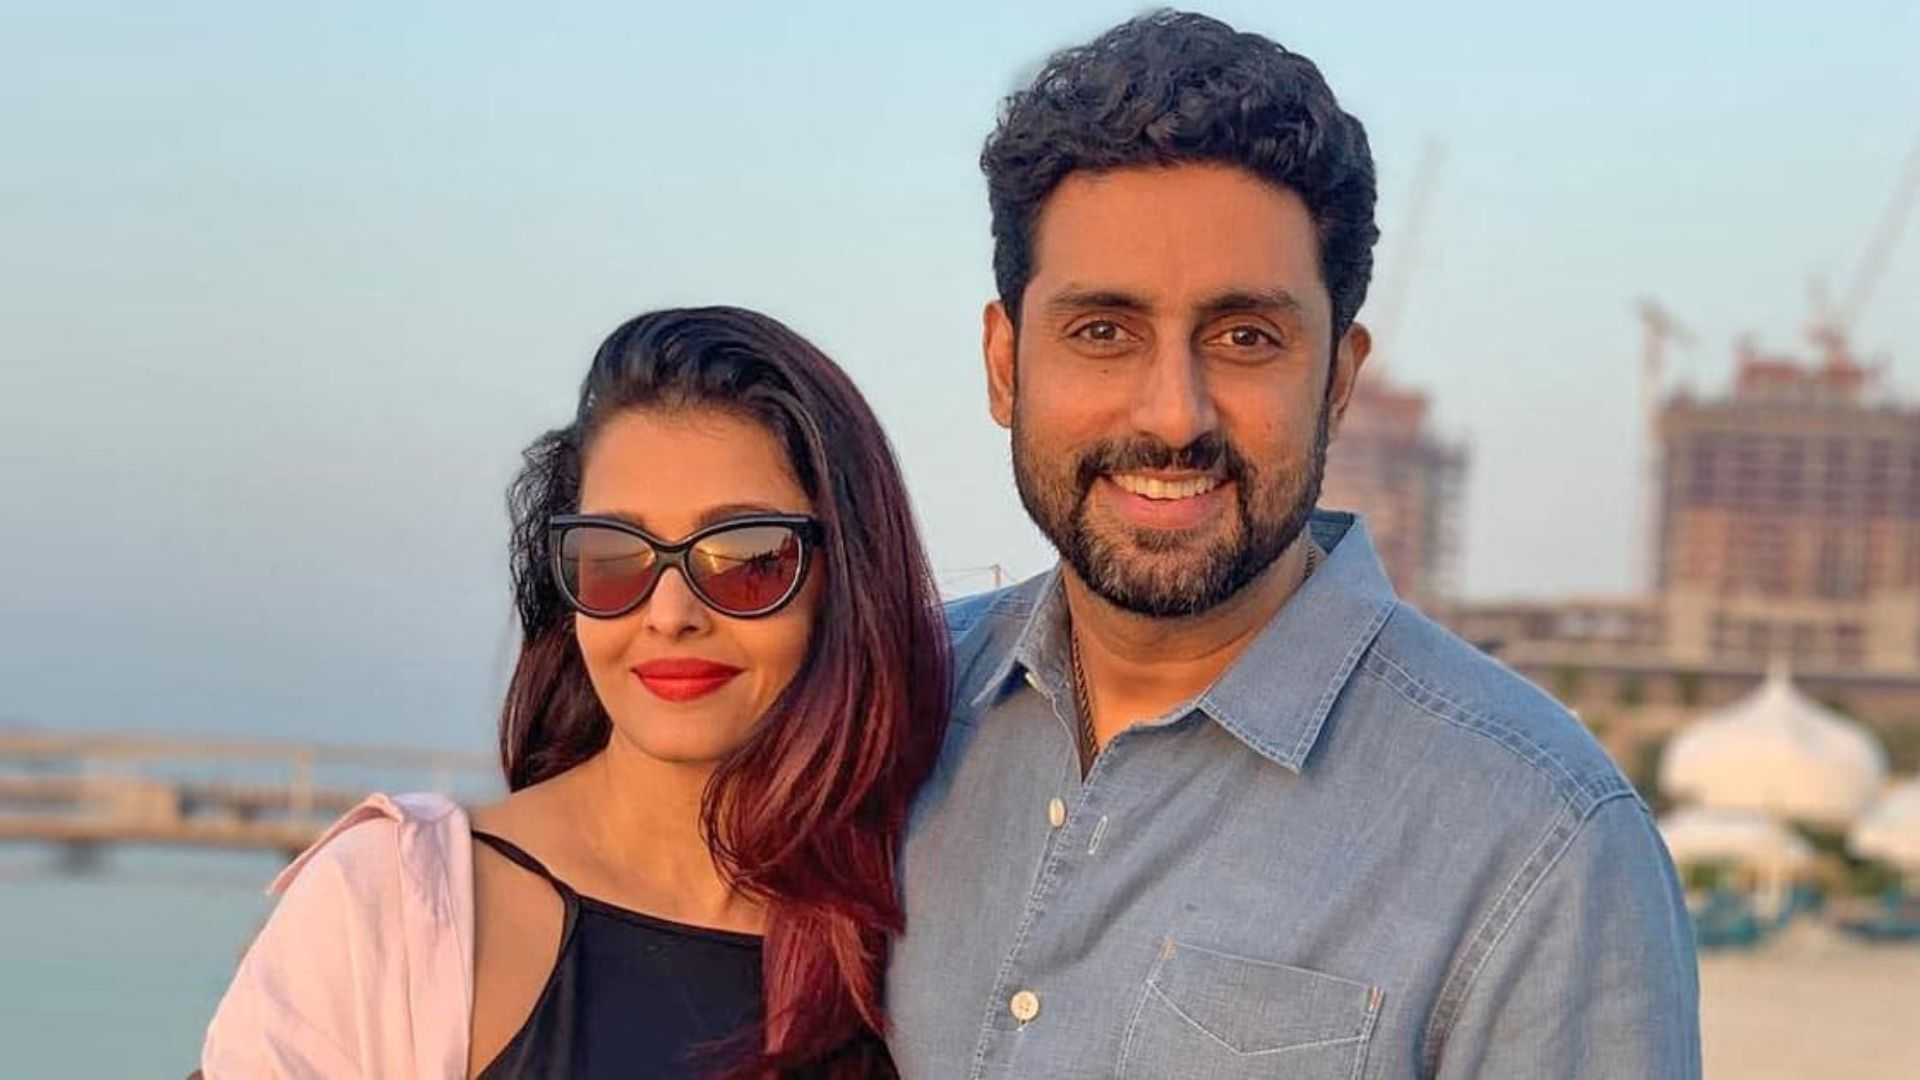 Abhishek Bachchan and Aishwarya Rai Bachchan spark separation rumours after former spotted without wedding ring